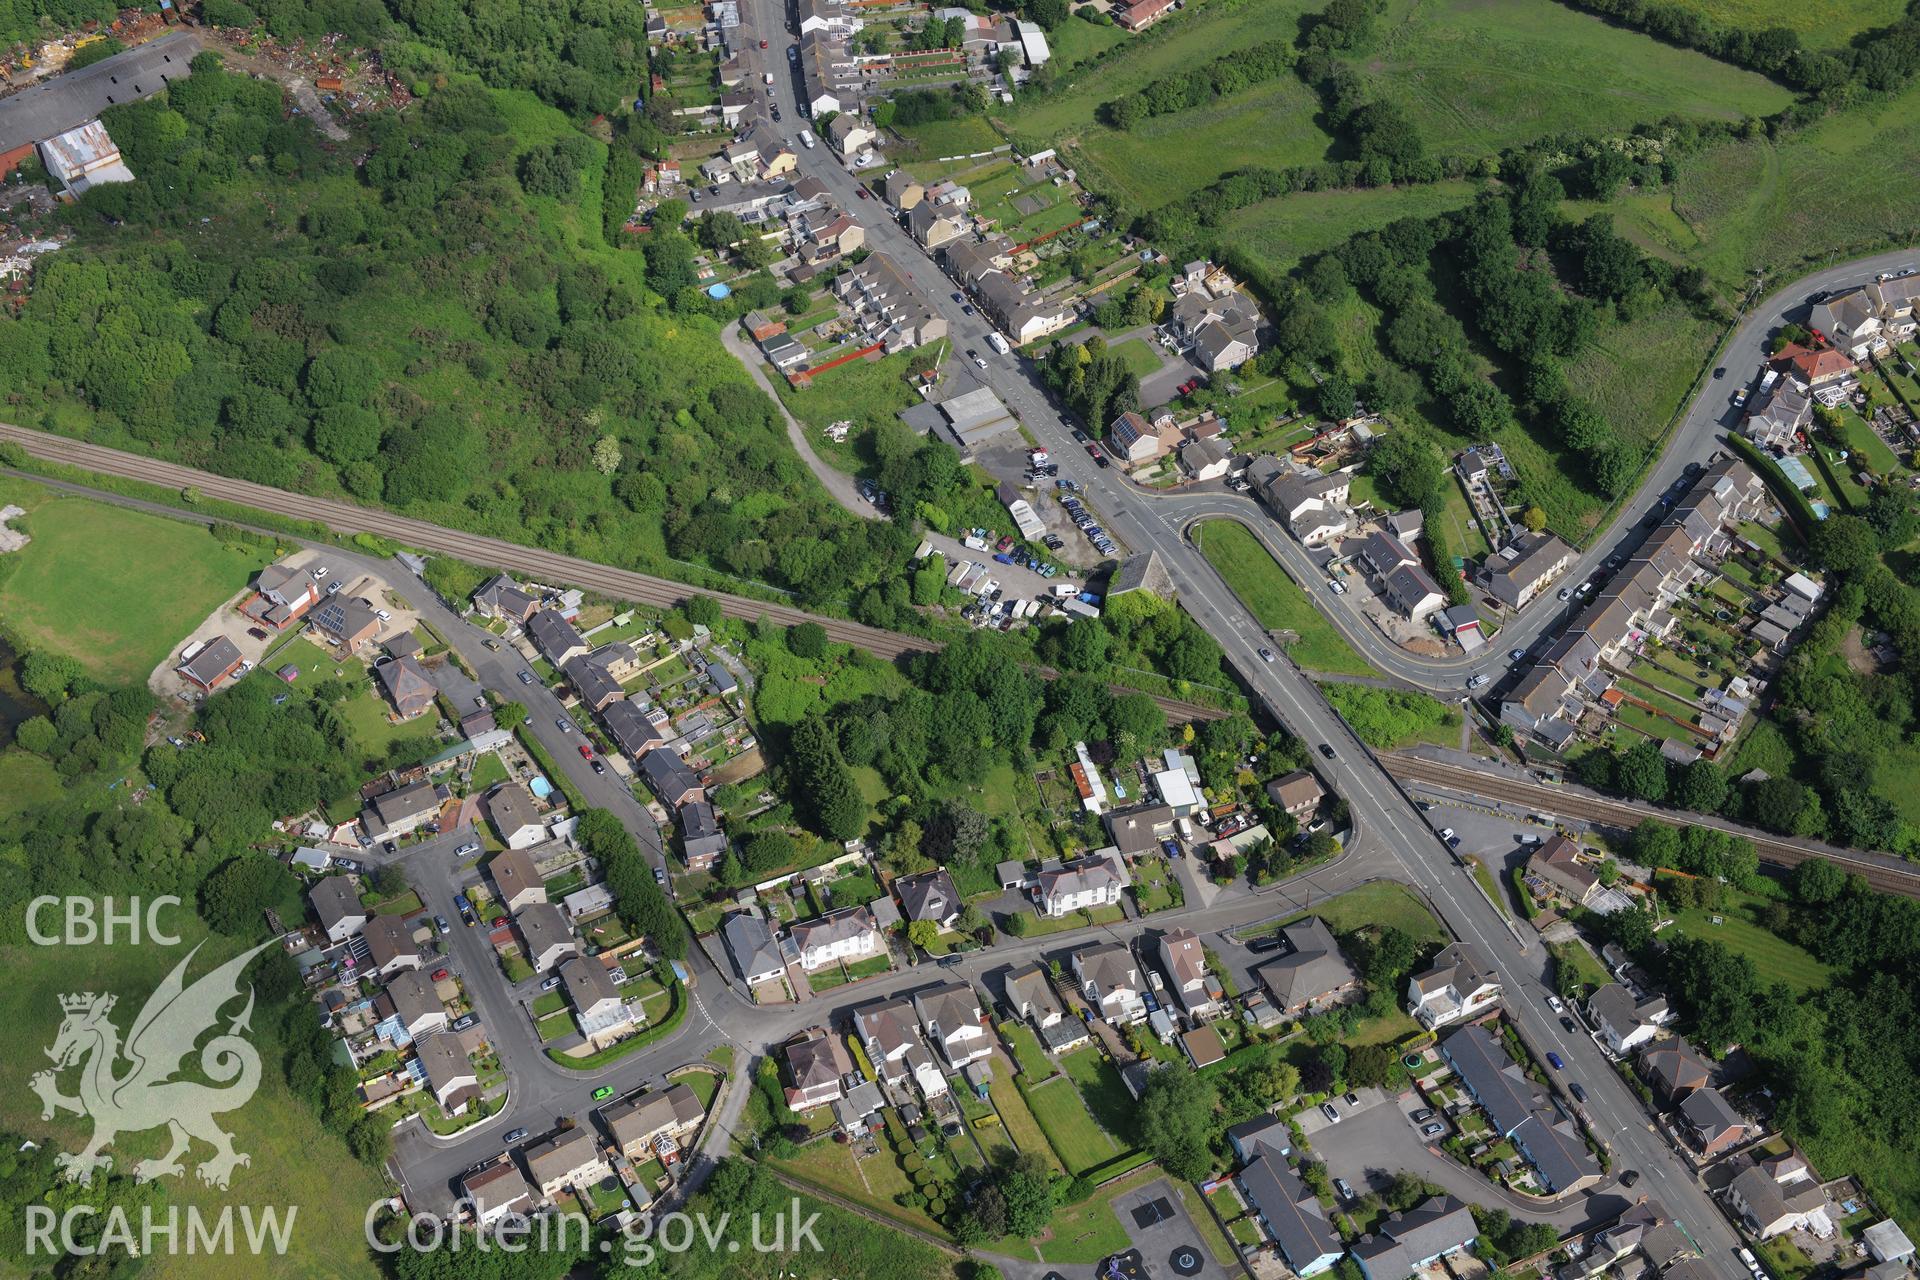 The village of Bynea, Llanelli. Oblique aerial photograph taken during the Royal Commission's programme of archaeological aerial reconnaissance by Toby Driver on 19th June 2015.